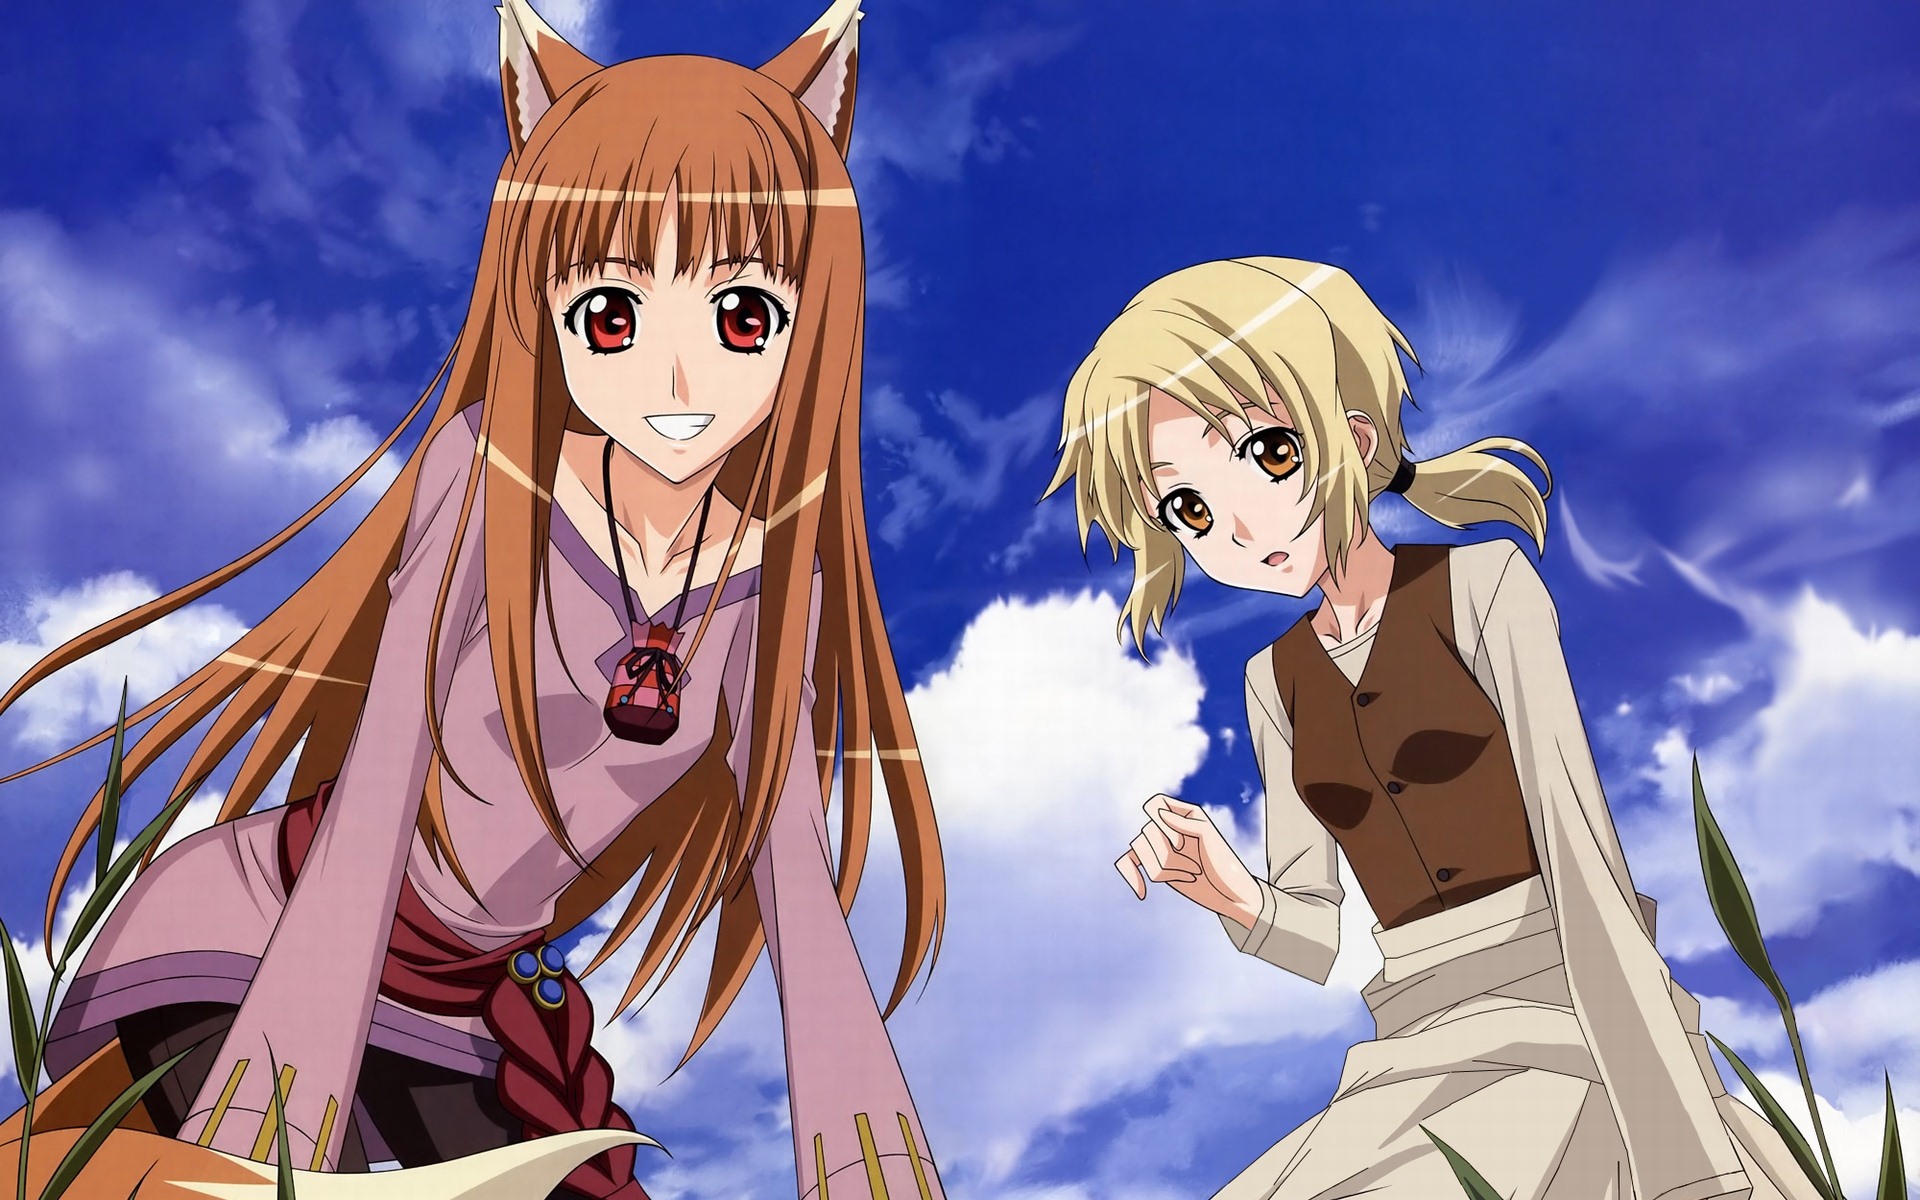 Spice and Wolf HD wallpapers #17 - 1920x1200